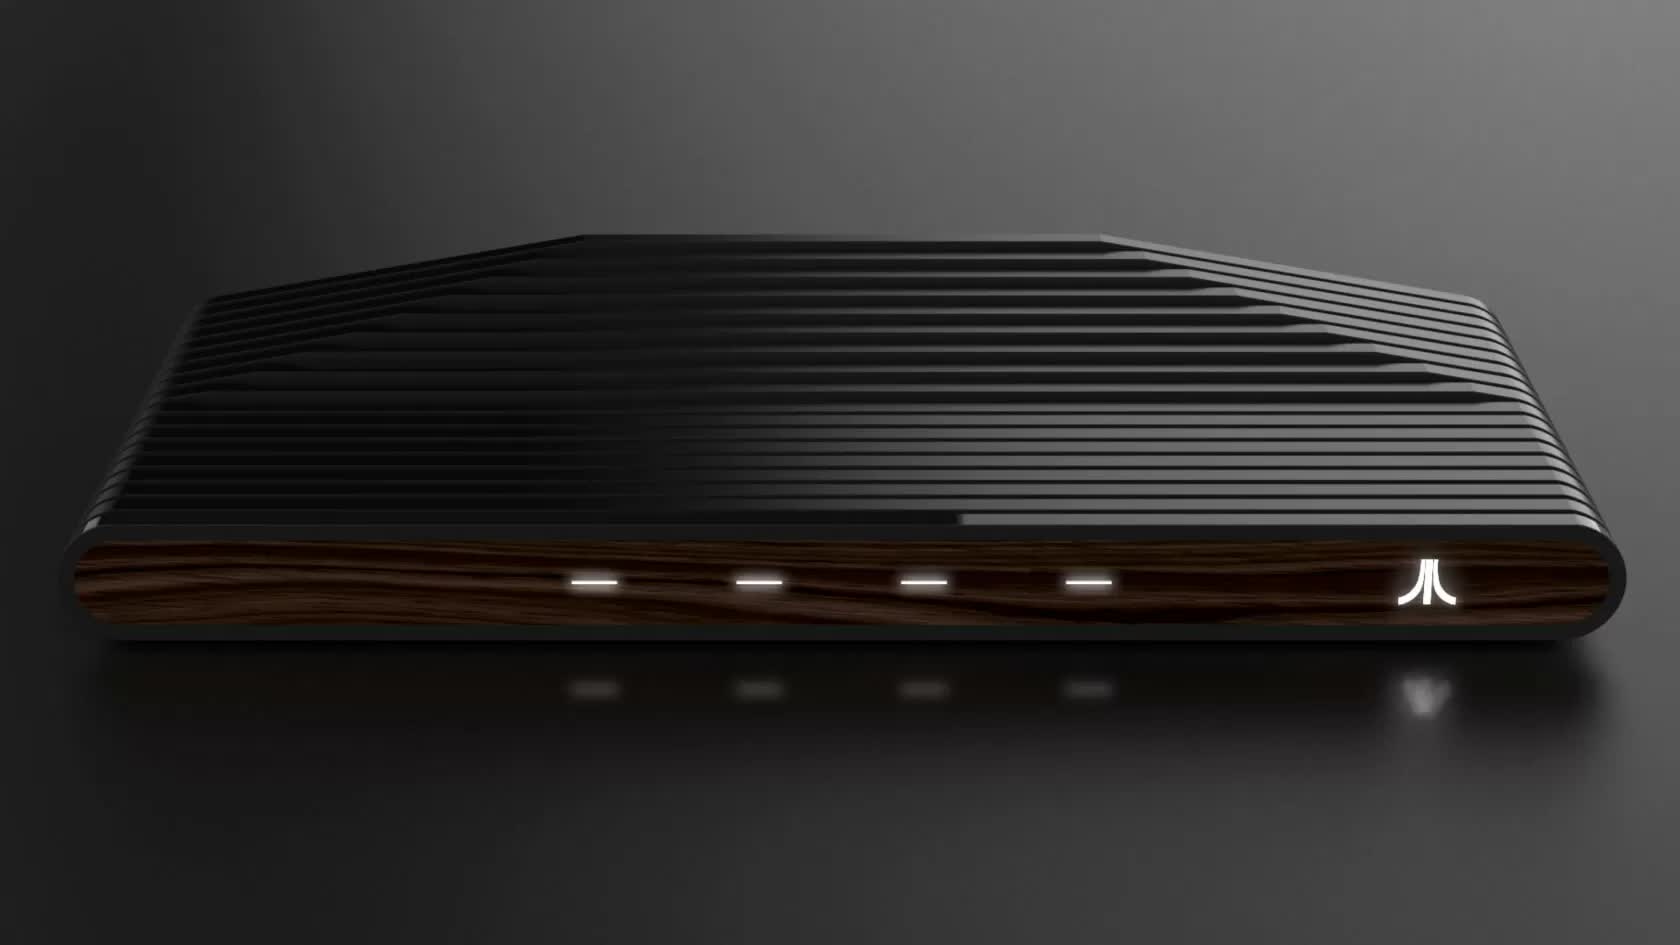 Atari suspends VCS manufacturing contracts, likely signaling the end of its short life